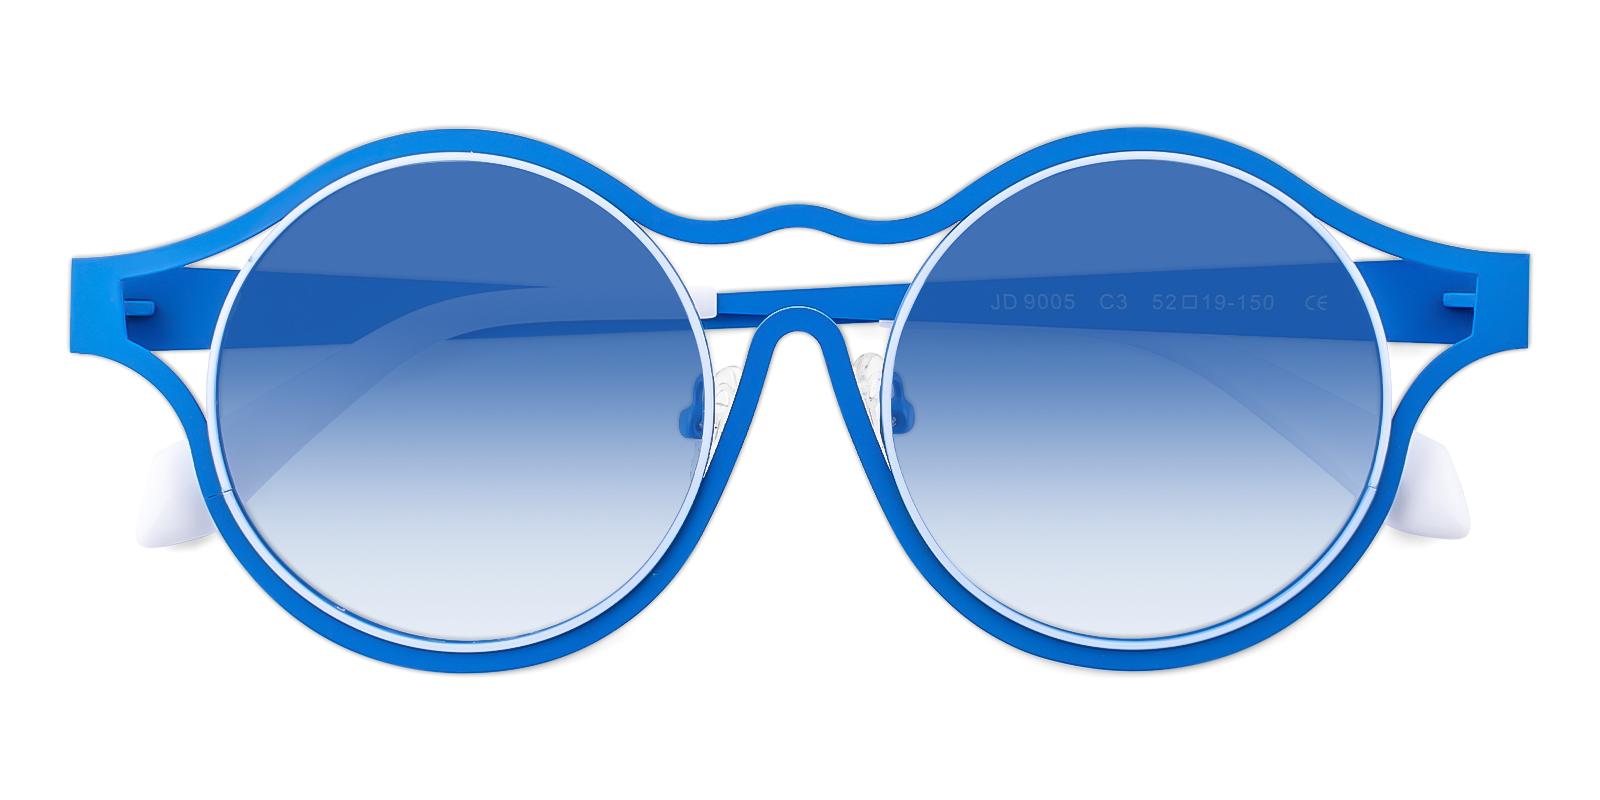 Bankcy Blue Metal NosePads , Sunglasses Frames from ABBE Glasses